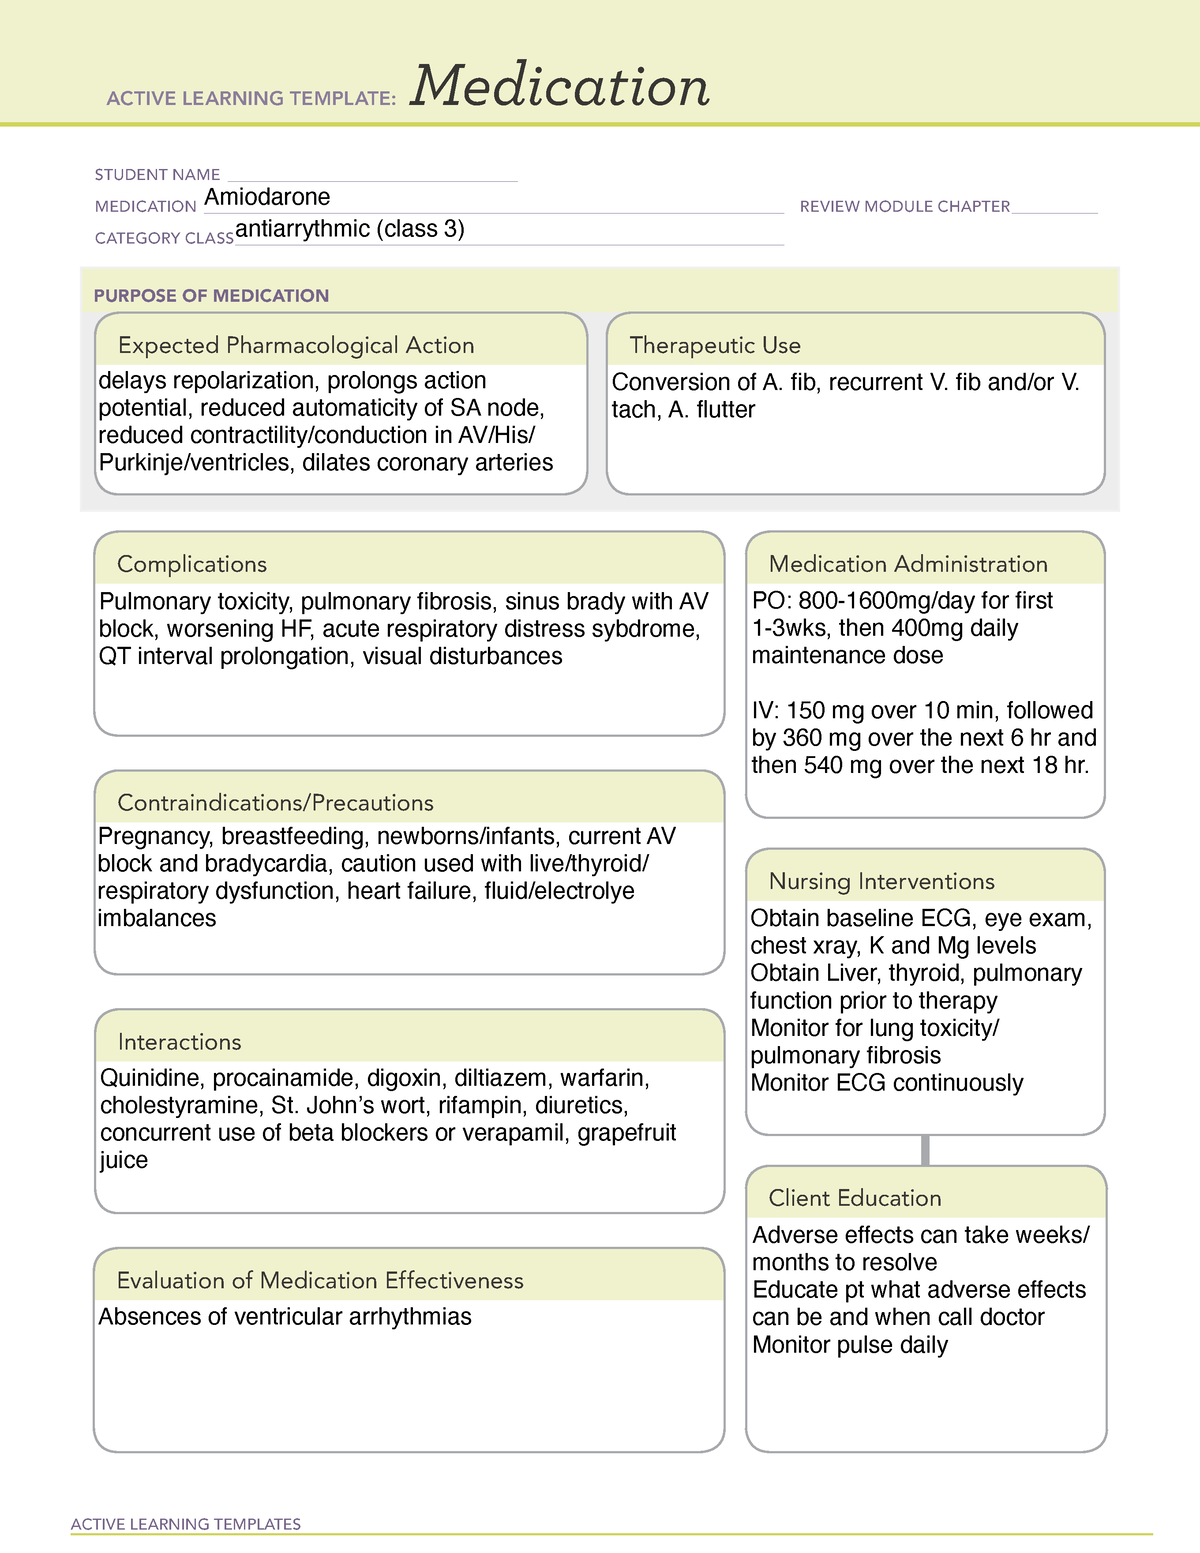 amiodarone-copy-med-cards-active-learning-templates-medication-student-name-studocu